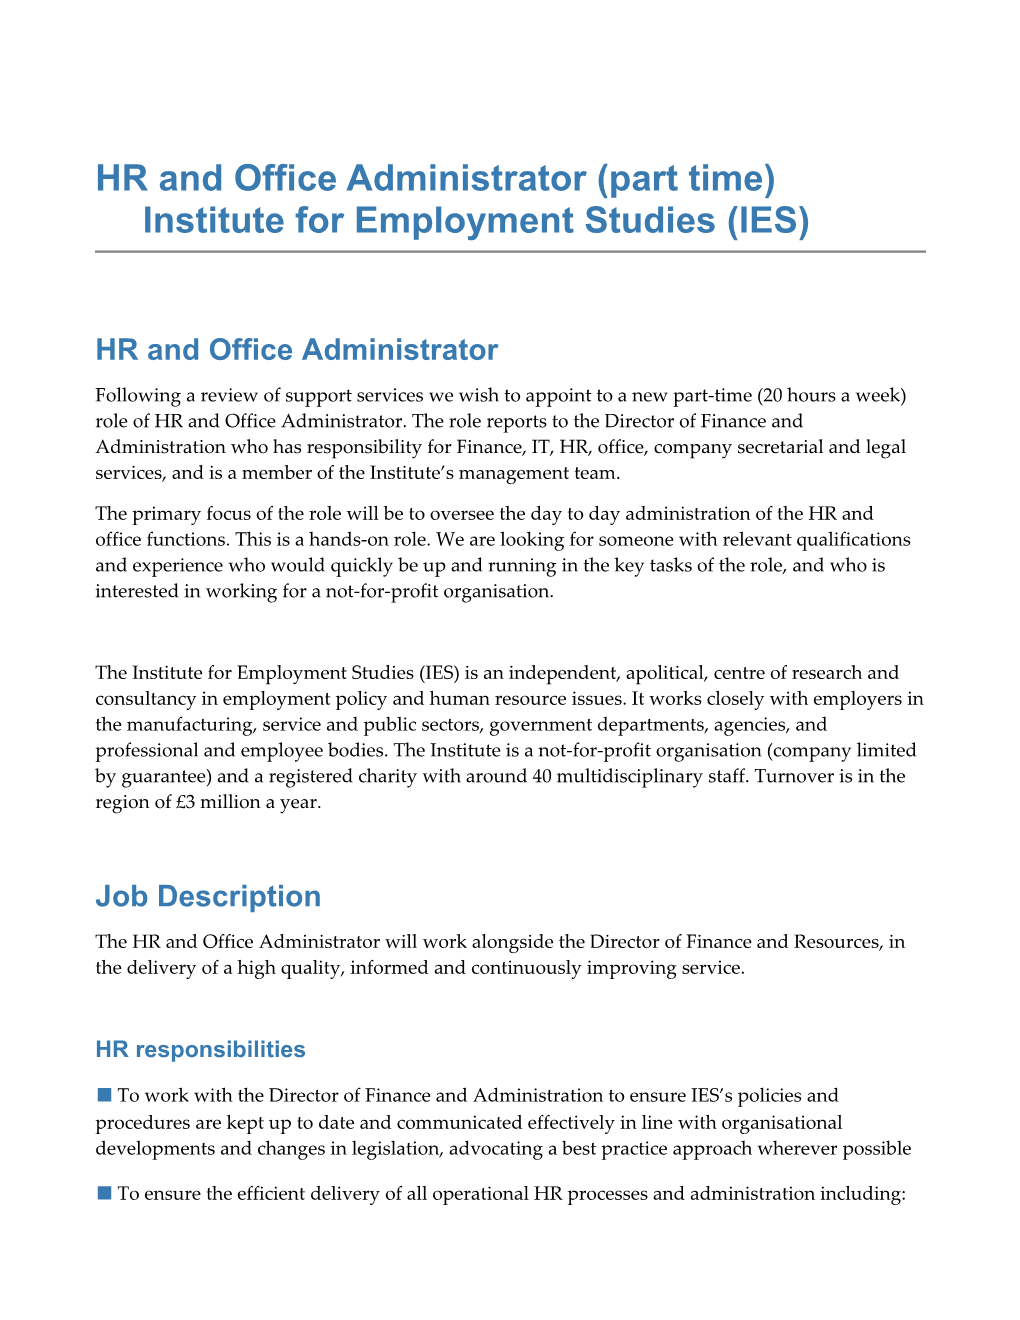 HR and Office Administrator (Part Time) Institute for Employment Studies (IES)